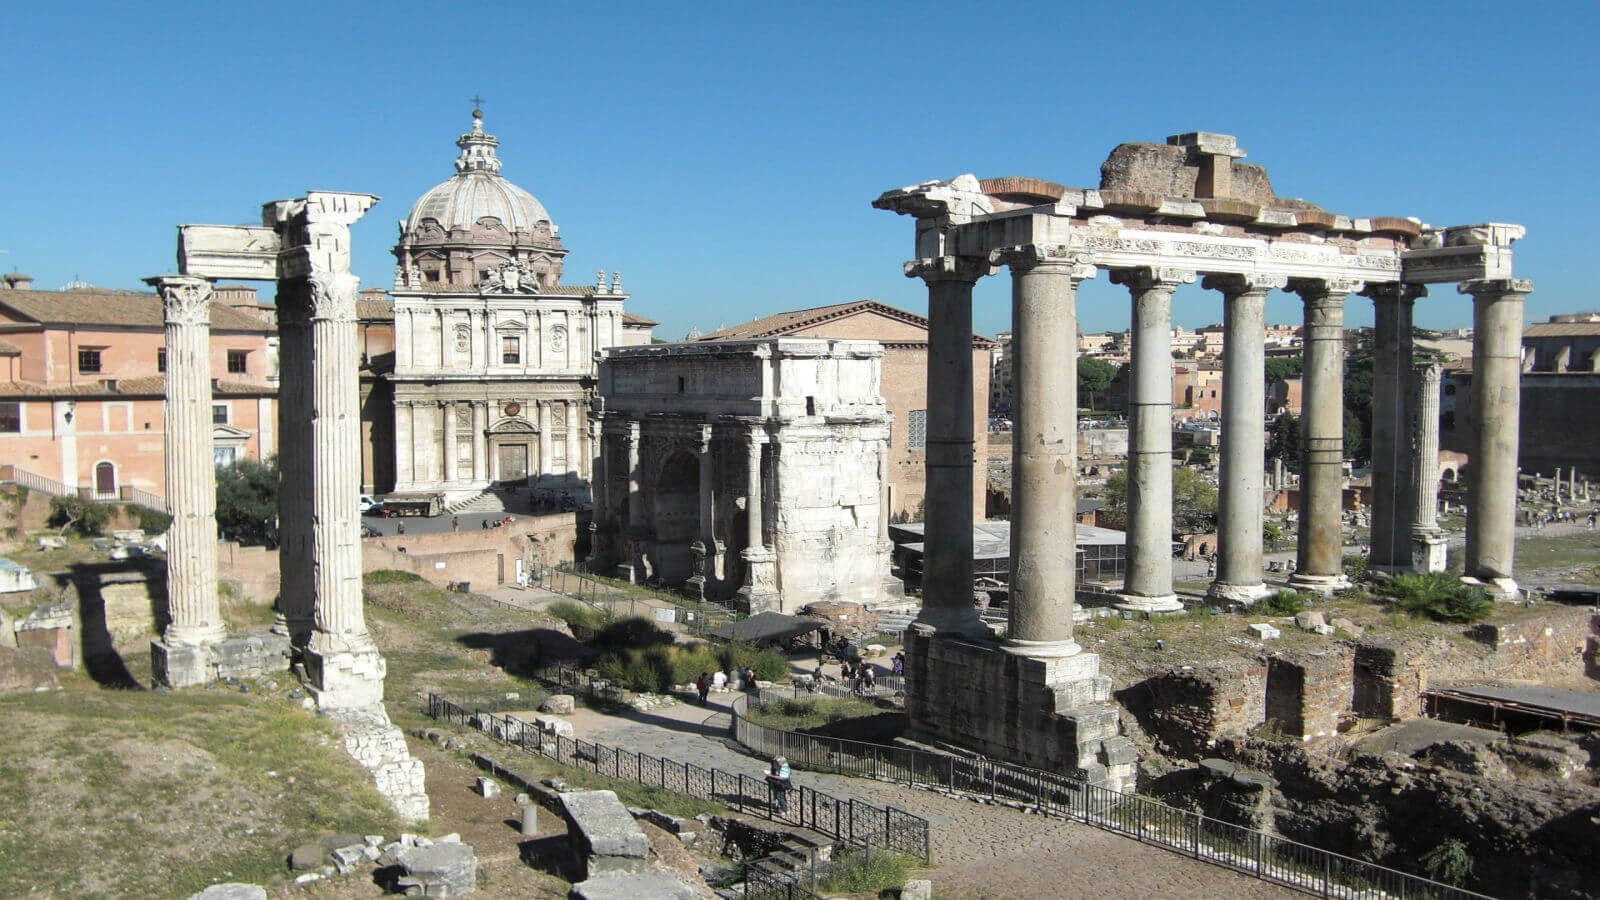 The ruins and remains of the Roman Forum